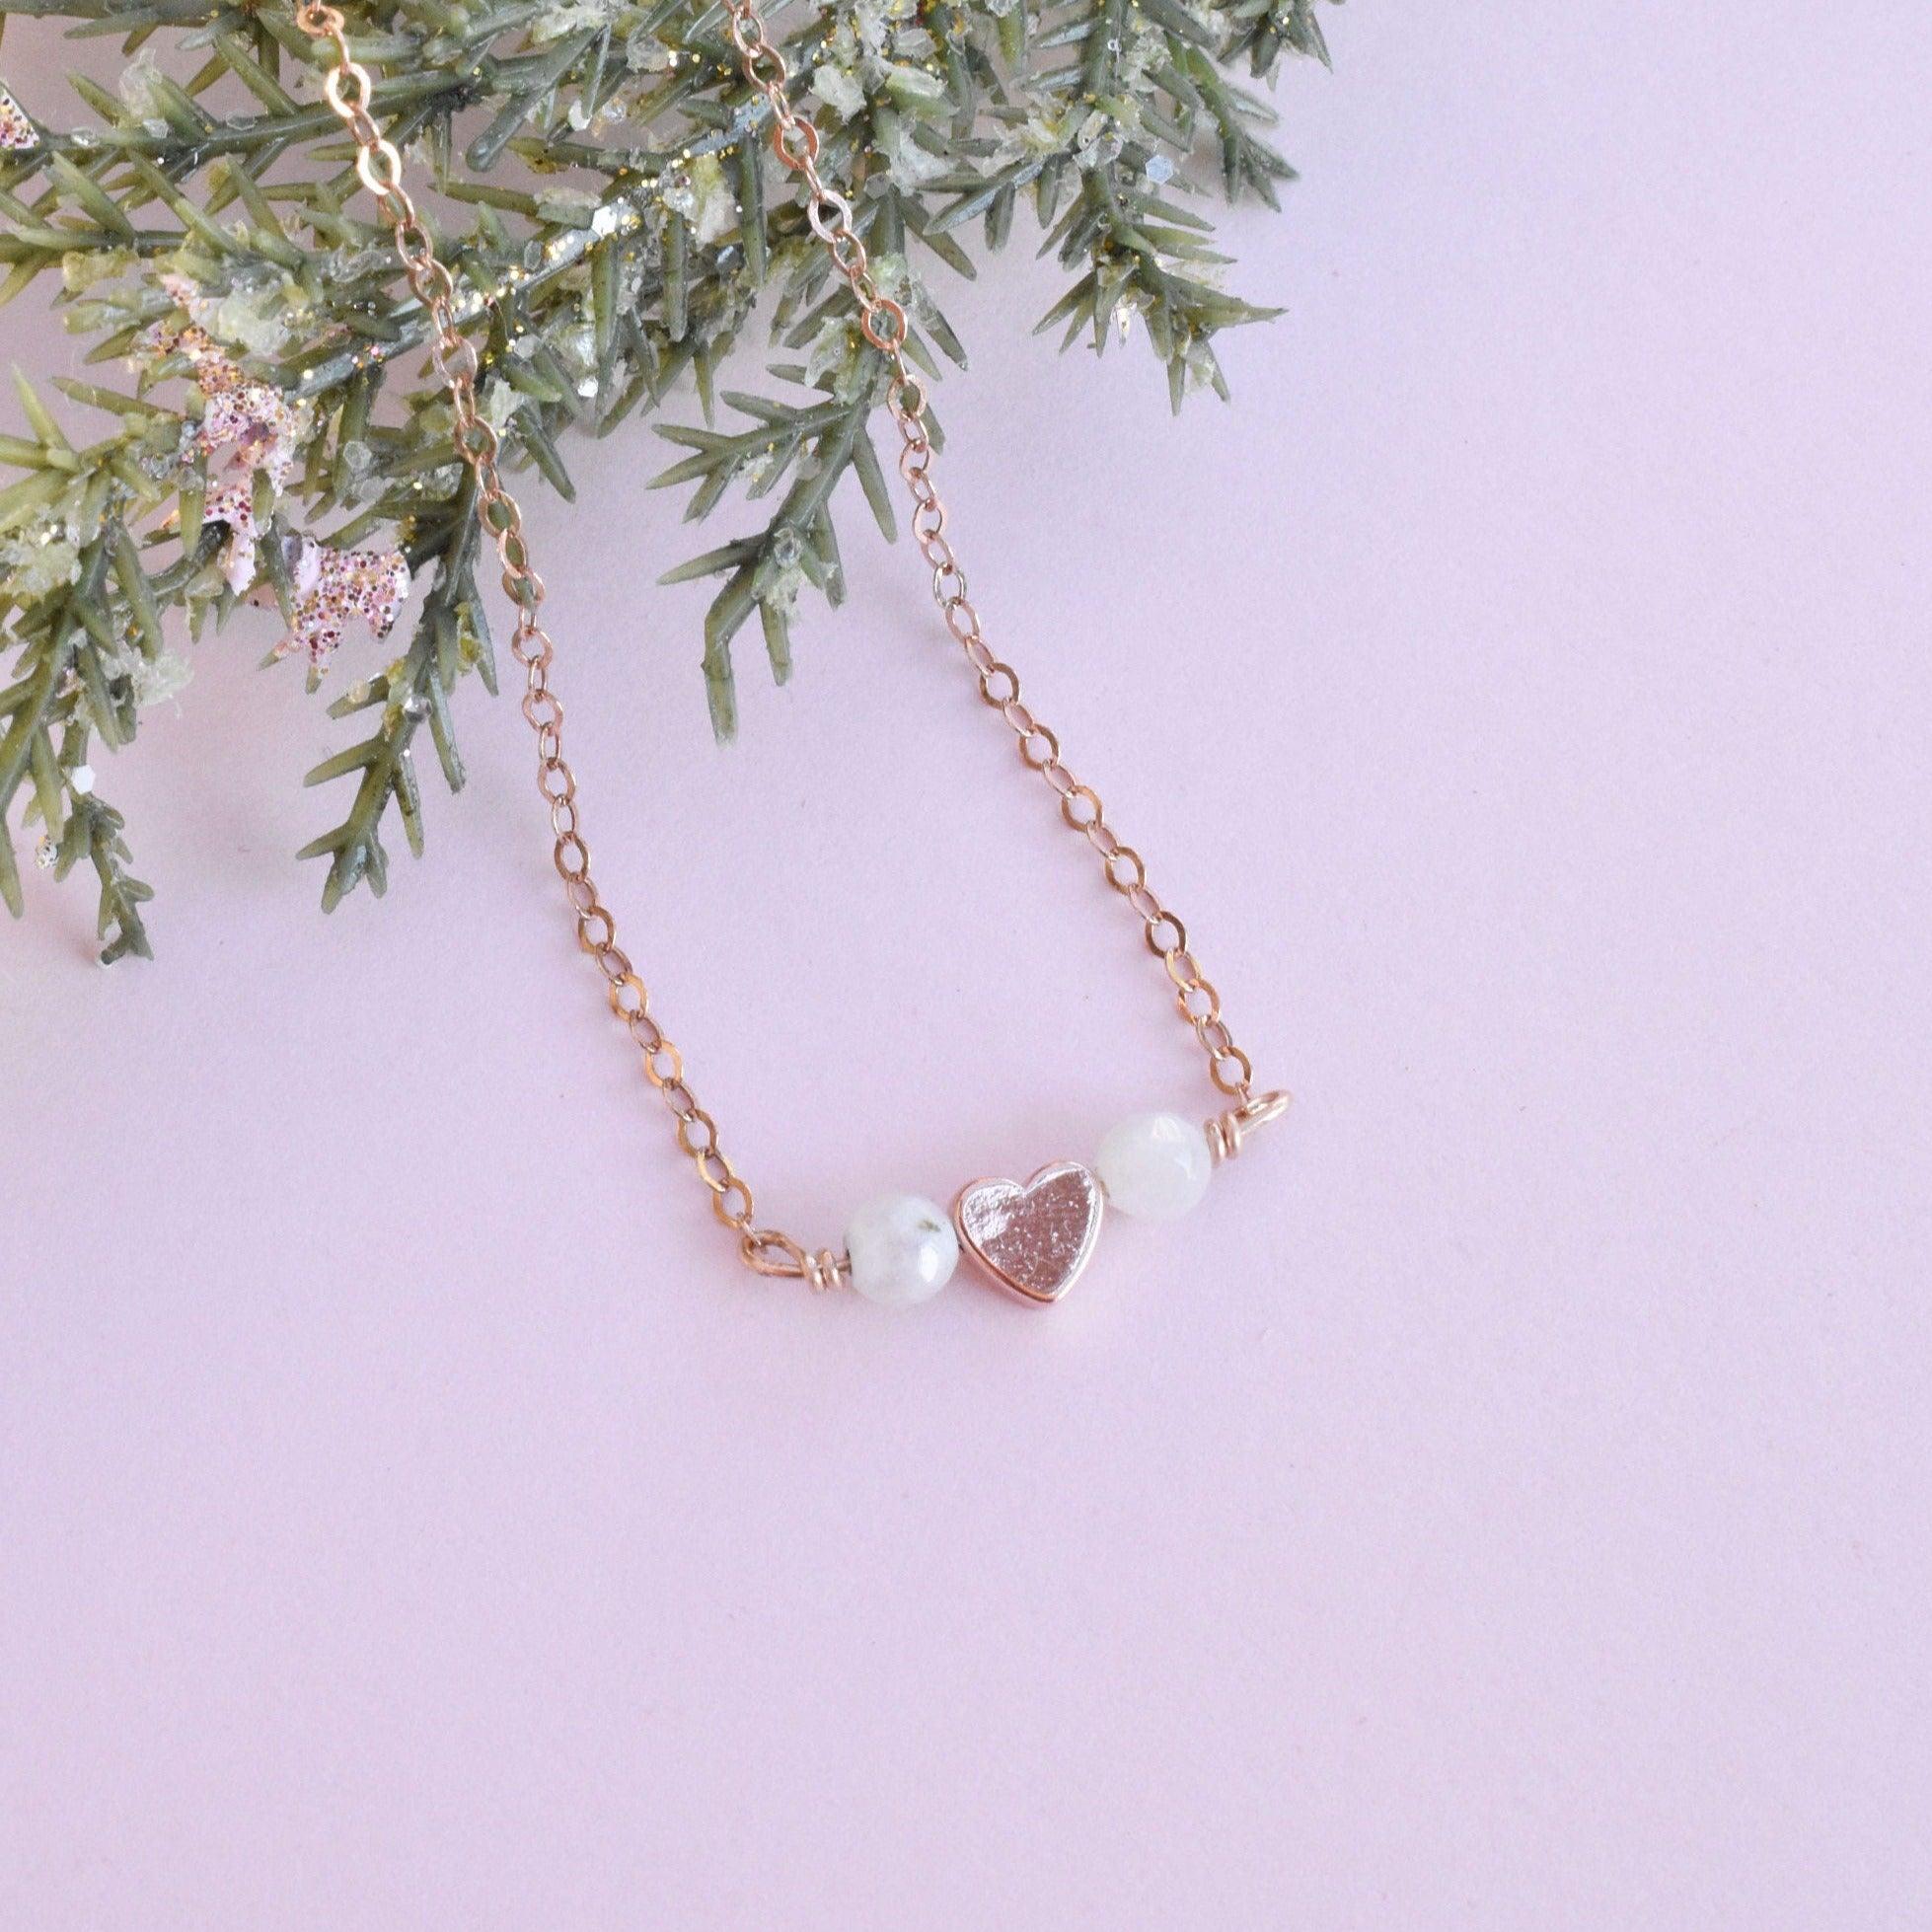 Dainty rose gold heart necklace with either rainbow moonstone or pink opal. It features a 14k rose gold-filled necklace and power stones that promote love and positivity.